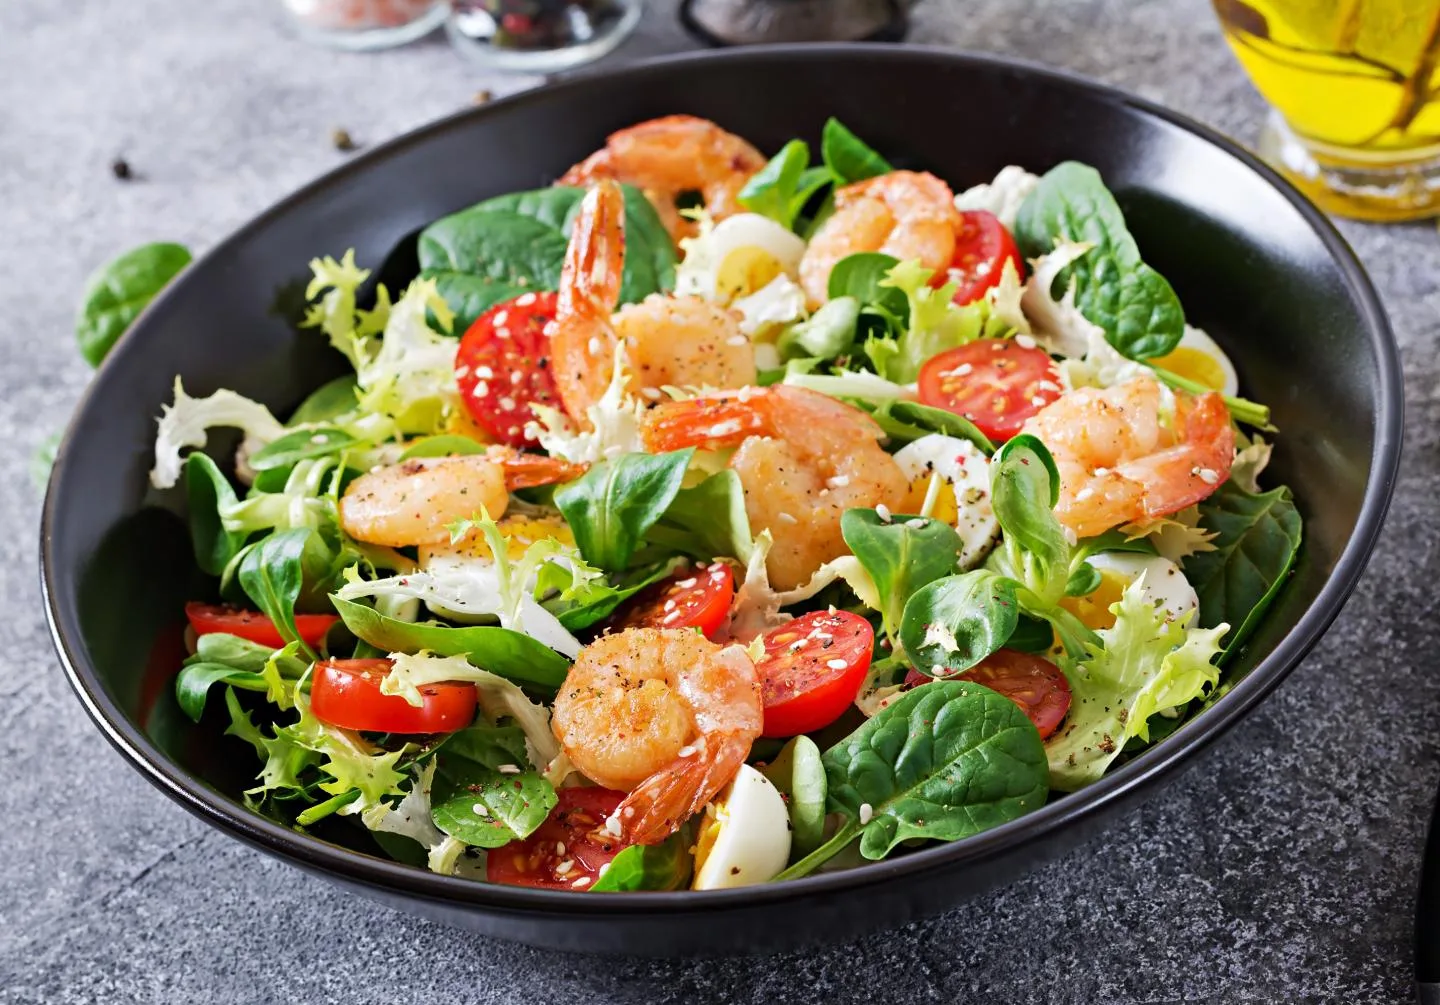 Shrimp Salad With Spinach and Warm Citrus Dressing light and refreshing meal that's packed with flavor and nutrition